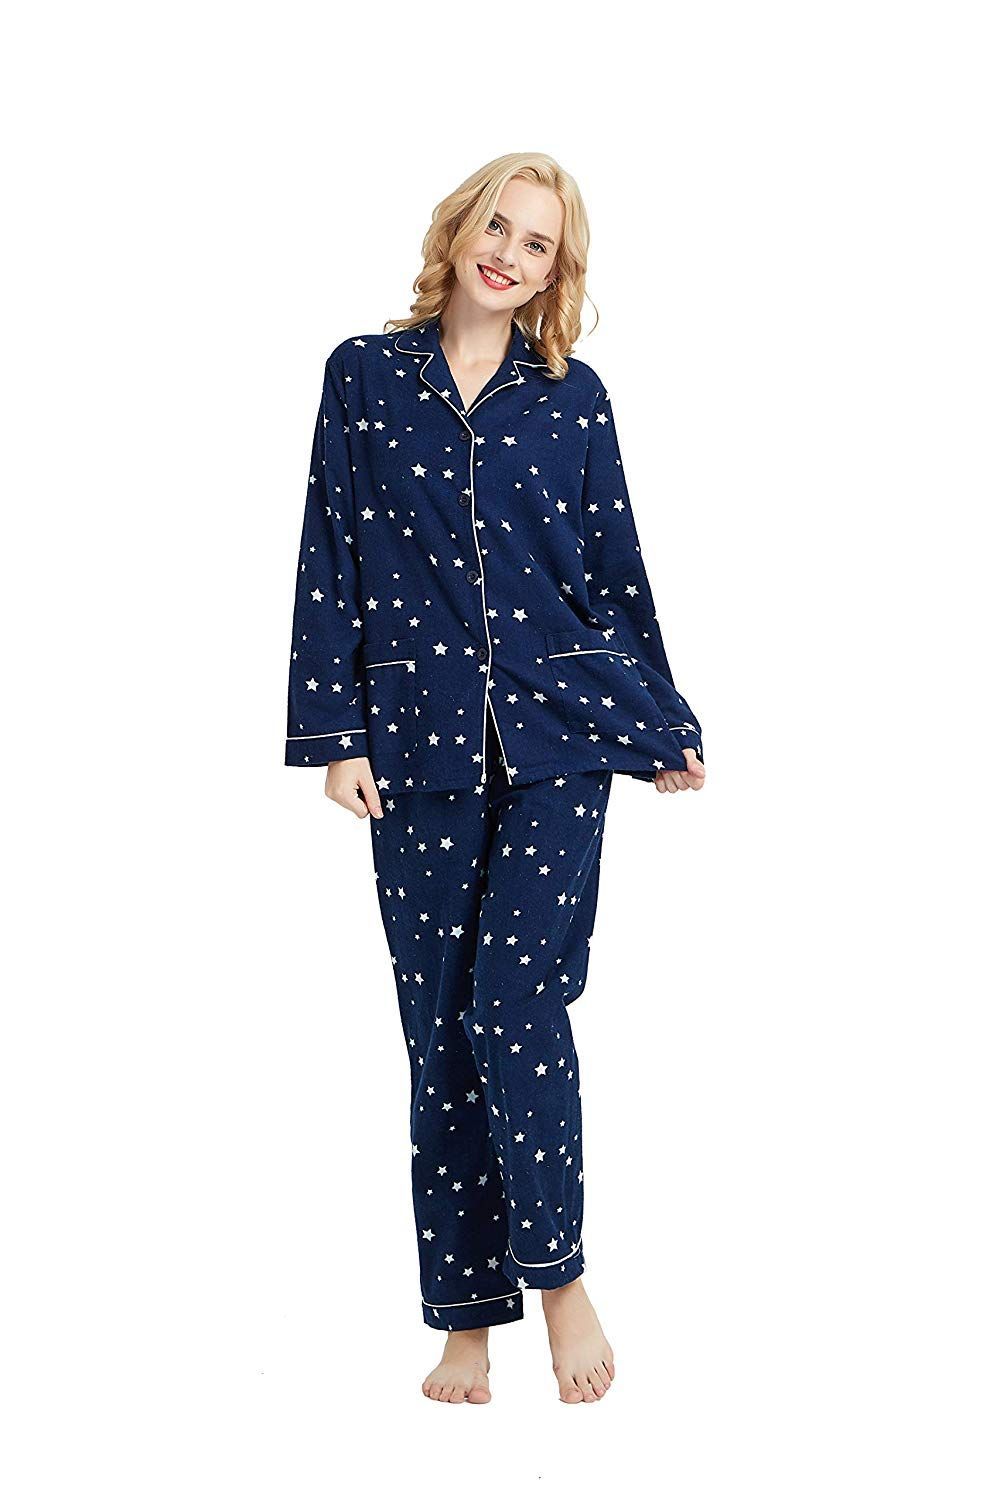 Girls Brushed Flannel Long Sleeve Blue Pyjamas with Cat & Star Print  Age 3/4 